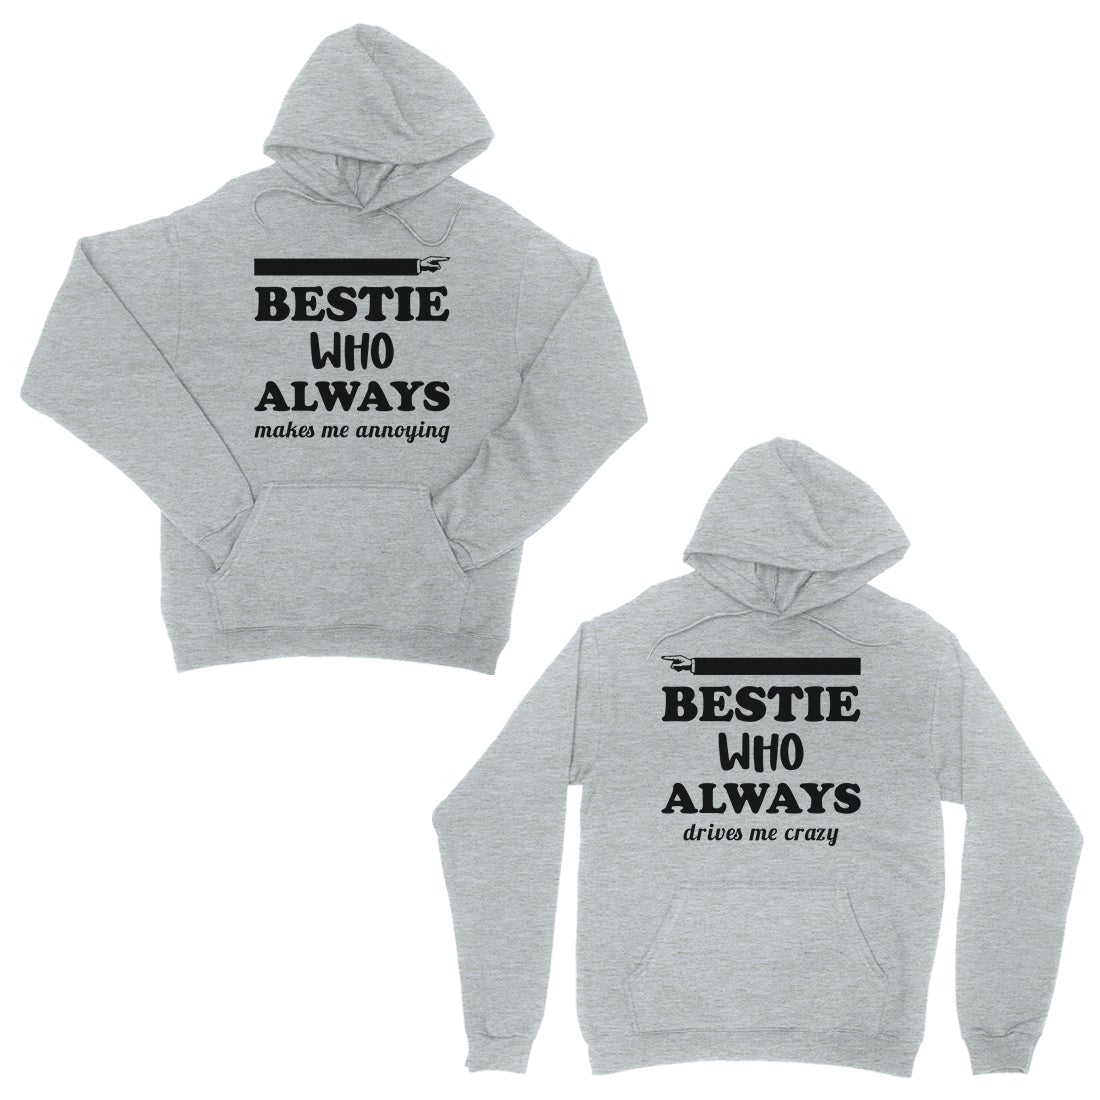 Bestie Always Matching Tops Unisex Pullover Hoodies For BFF Gift Gray